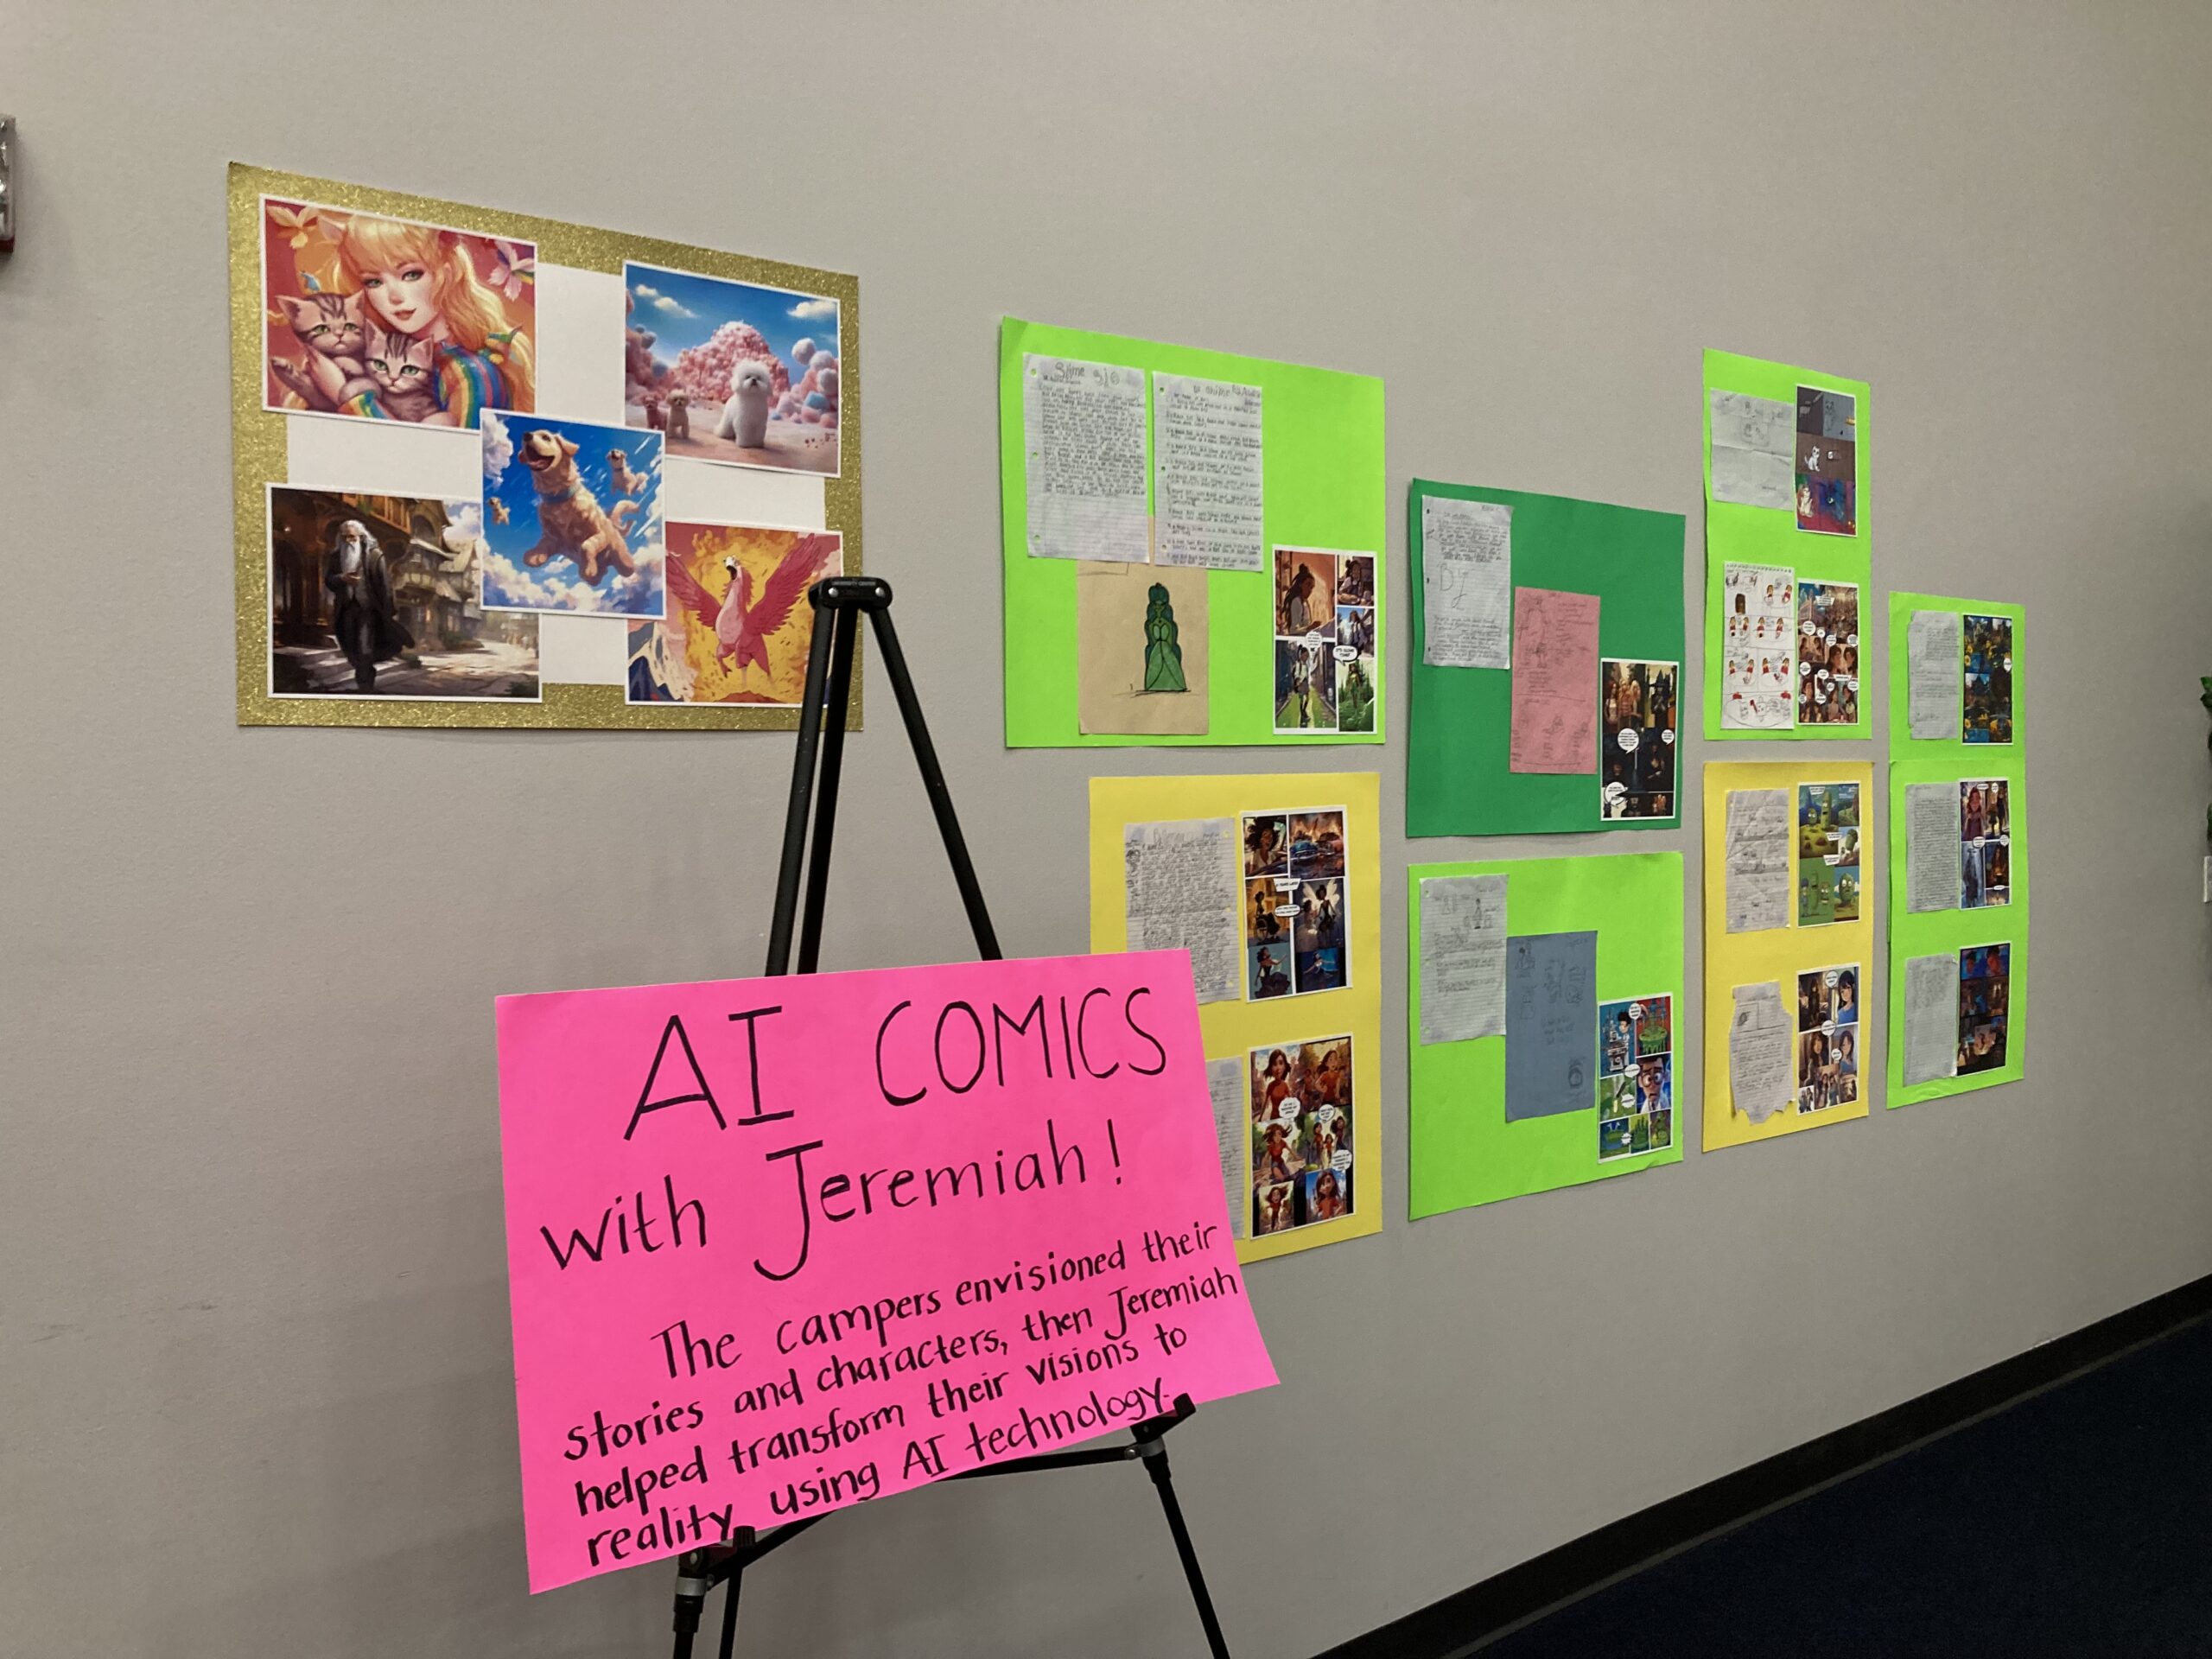 A poster reading "AI Comics with Jeremiah" is sitting on an easel in front of a wall with a gallery of comics created by the campers.